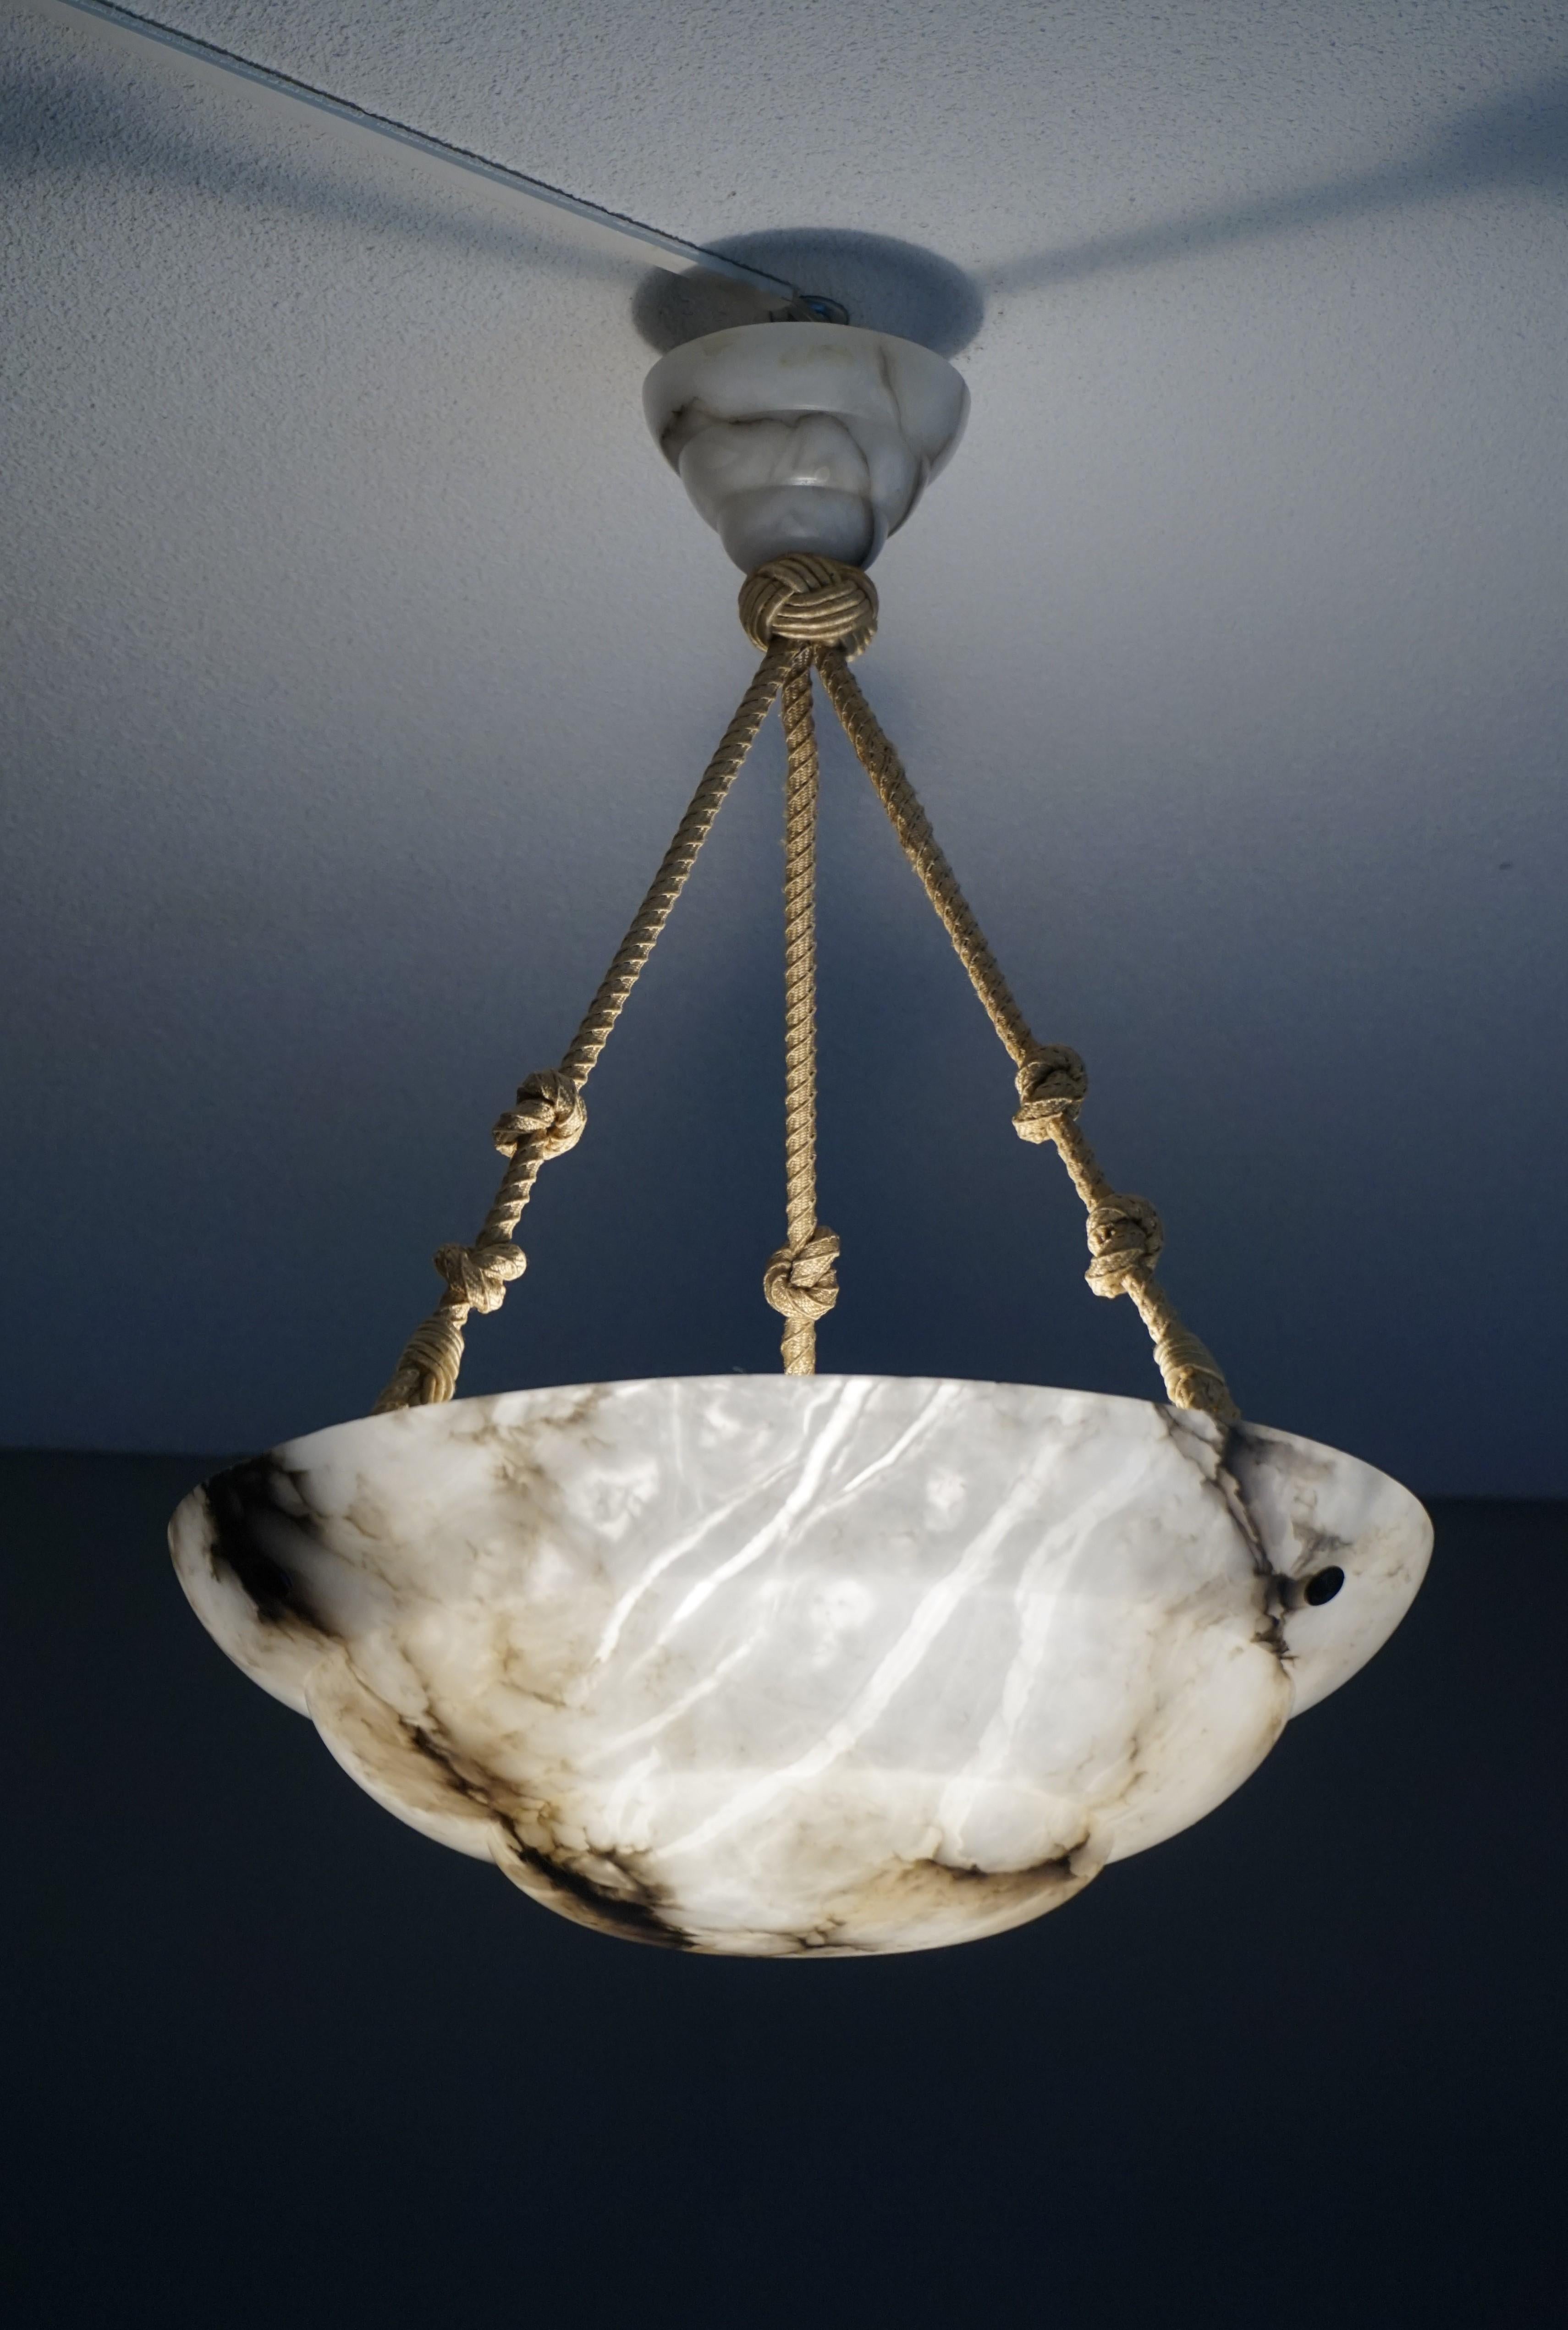 Stunning black and white alabaster chandelier.

This practical size, perfect height and excellent condition Art Deco pendant could not be more original. Every piece, from the alabaster canopy down to the excellent Art Deco shade is exactly like it